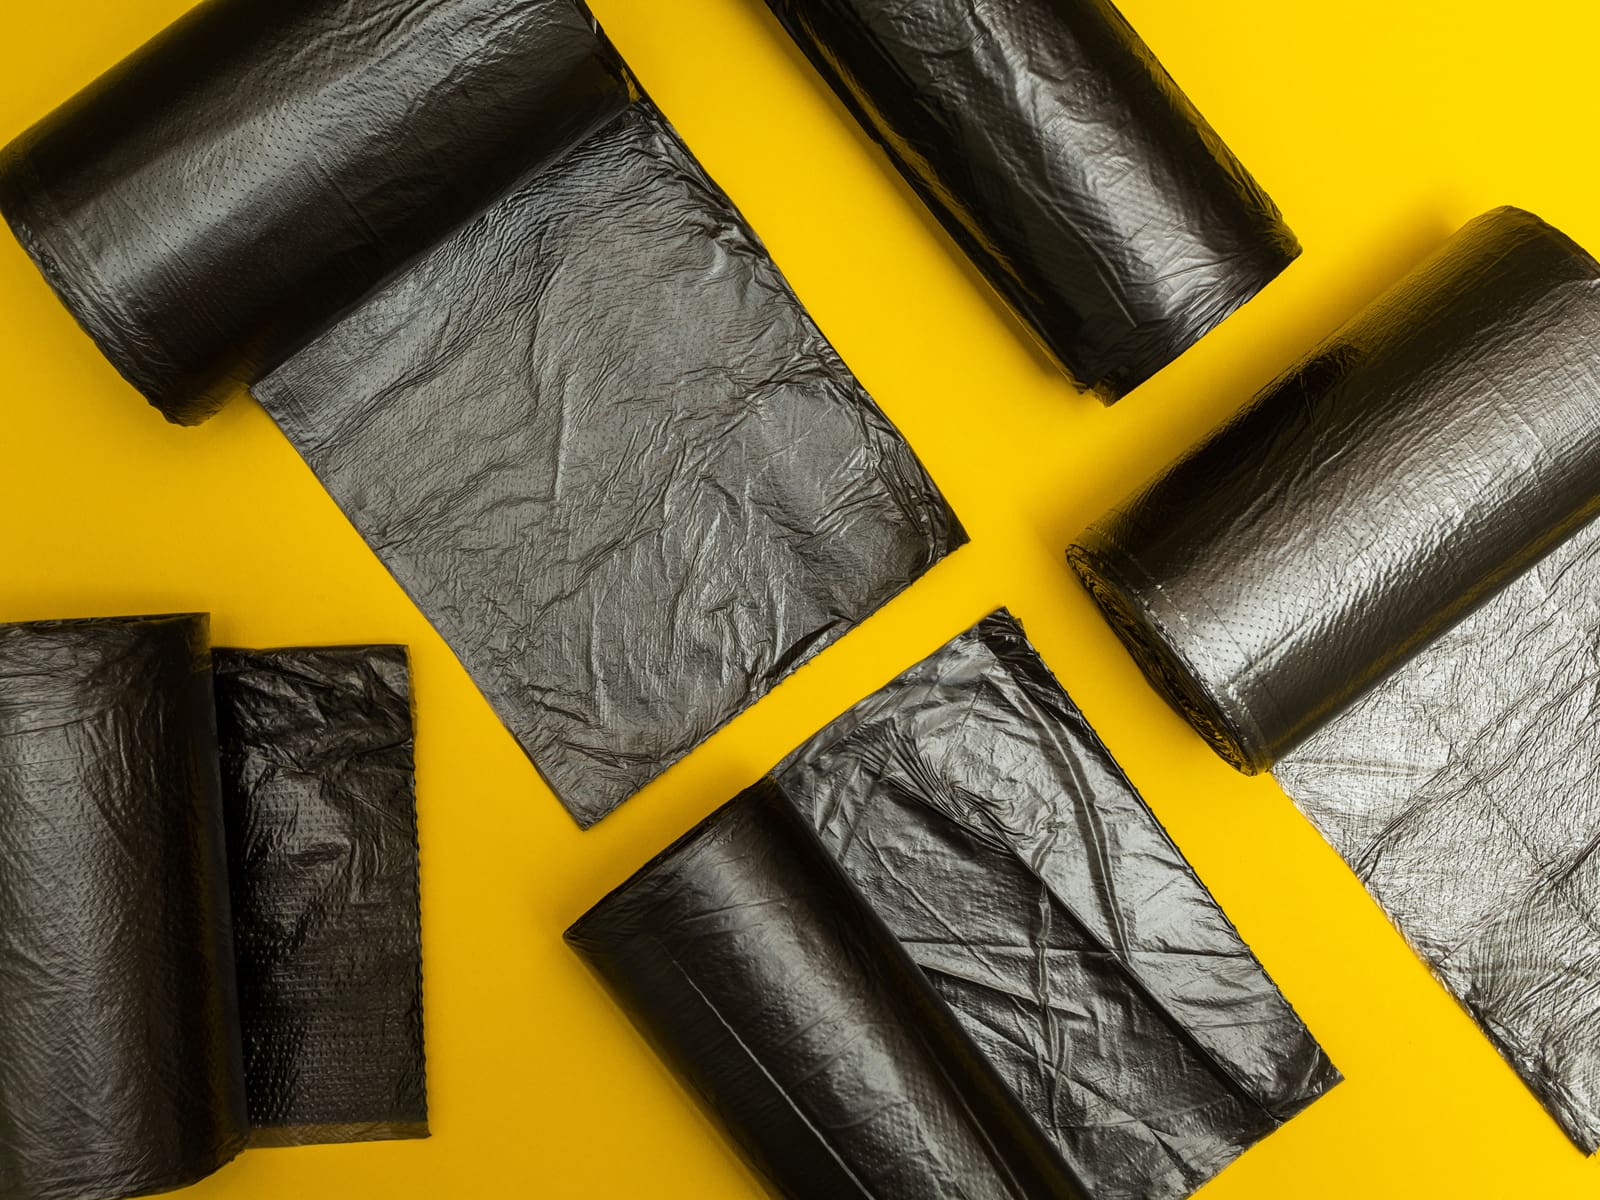 Black garbage bags in a layflat image on an orange background for a piece on trash can sizes